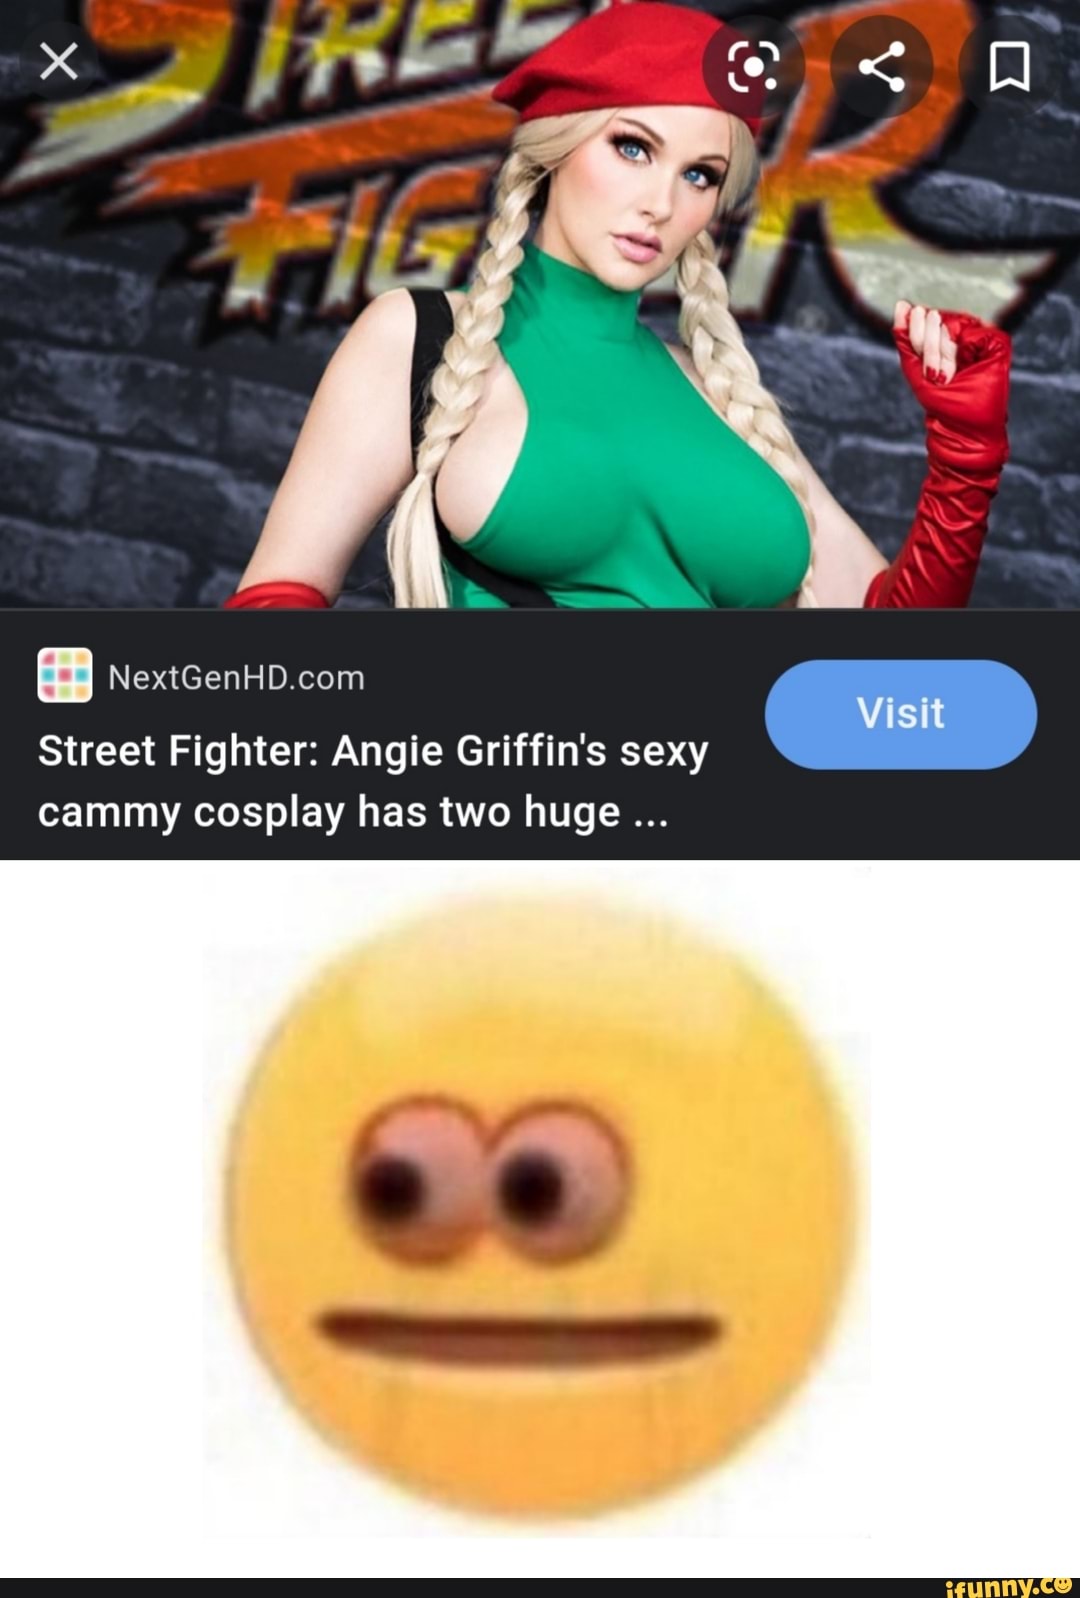 Angie griffin discord